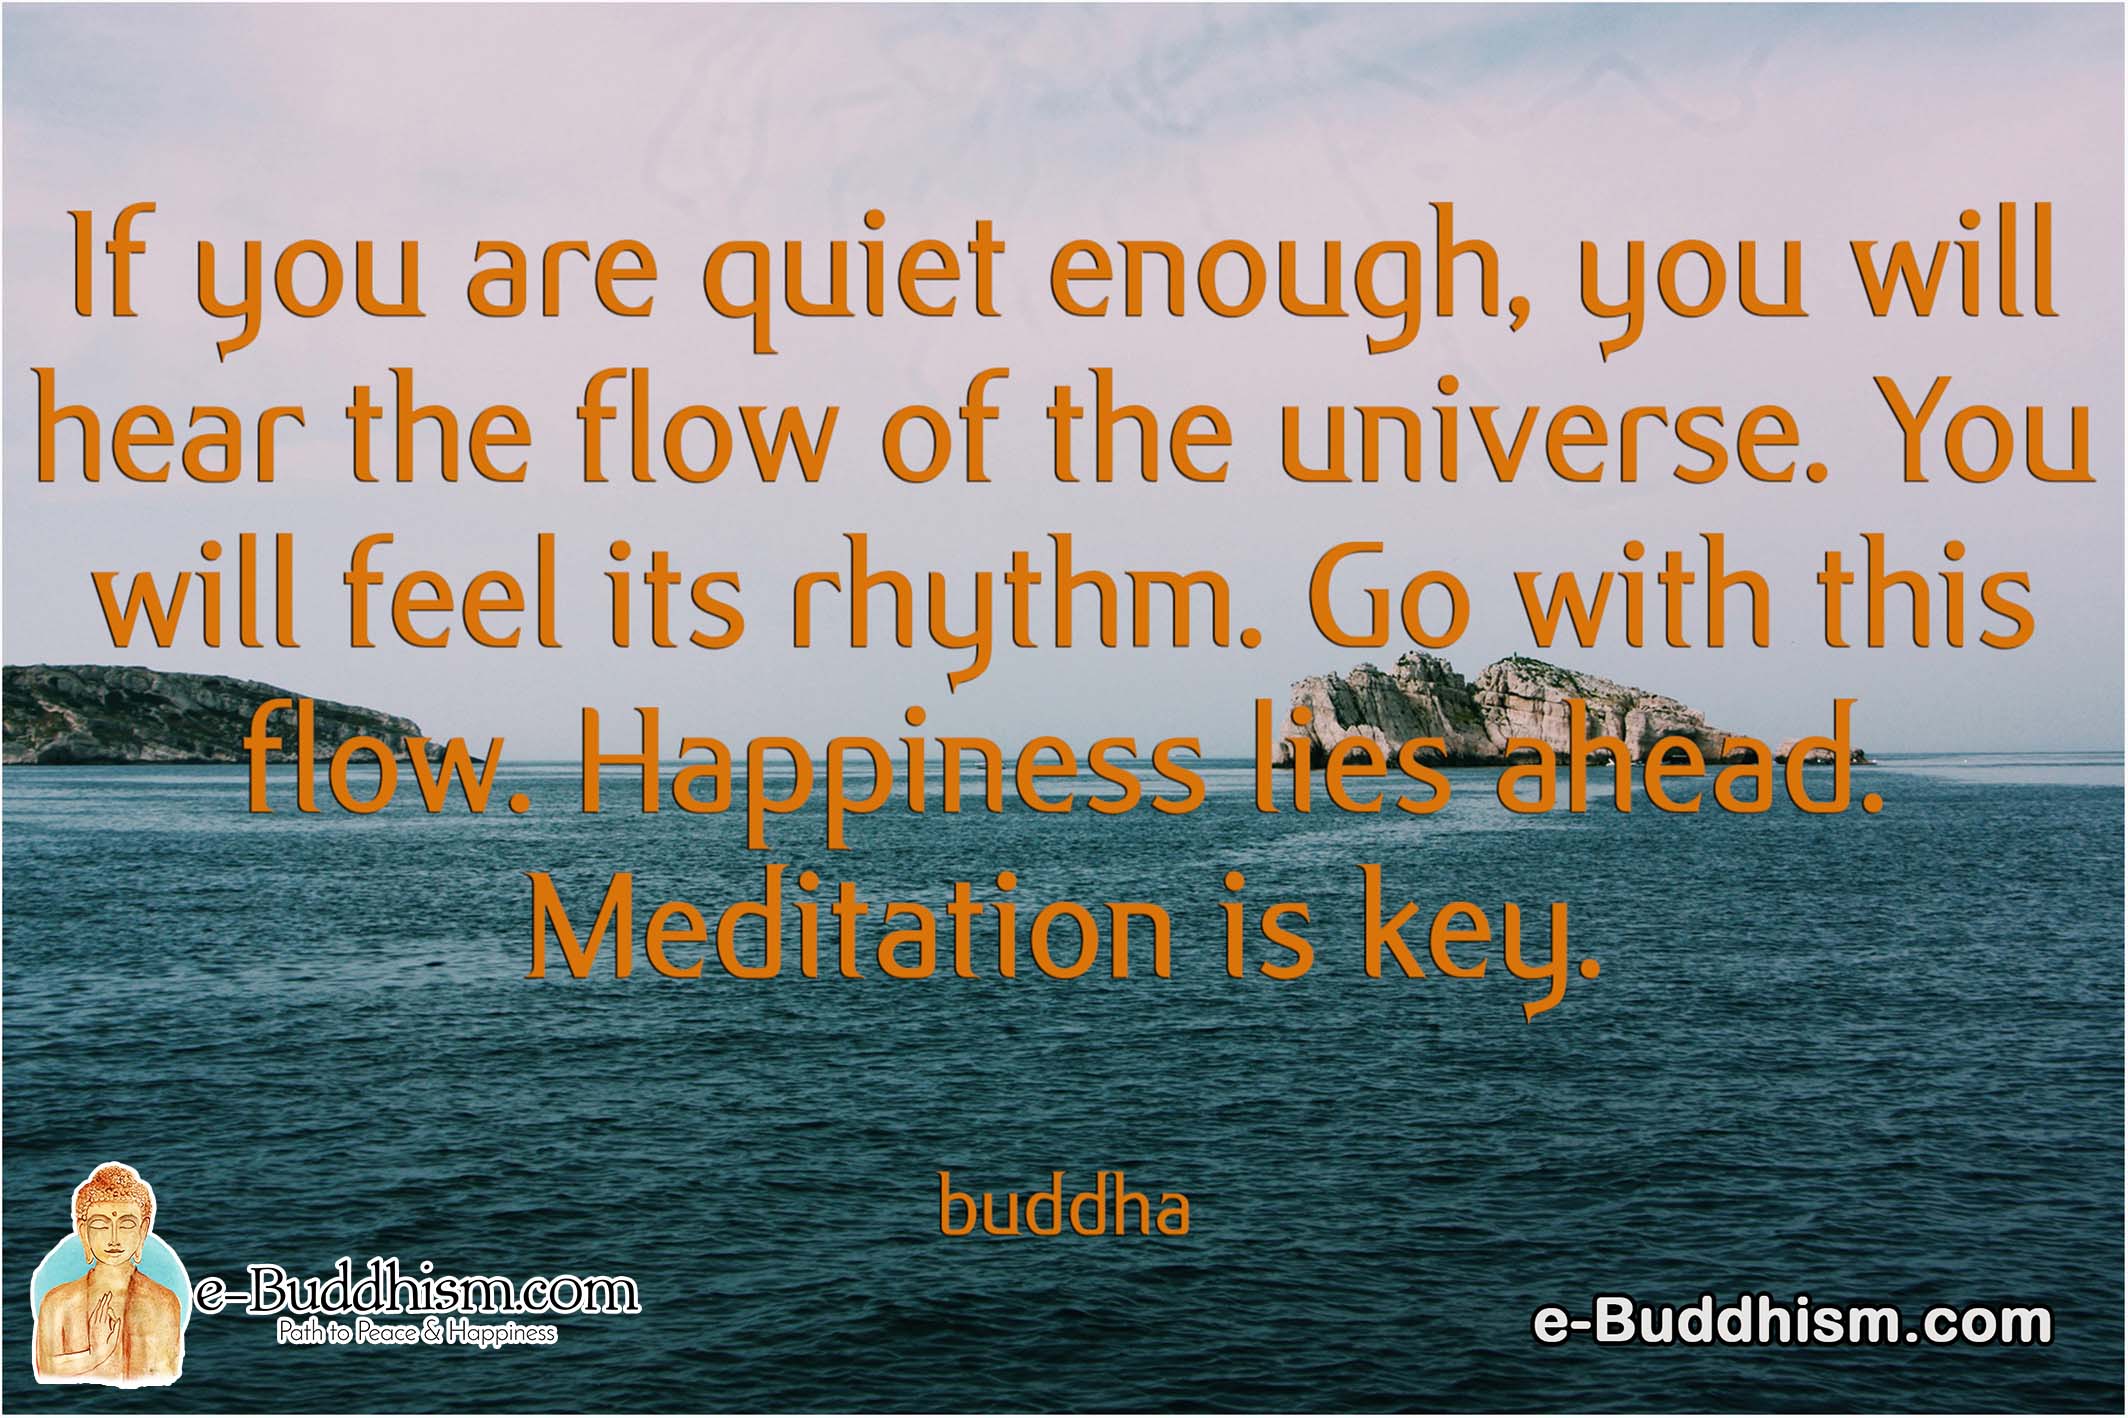 If you are quiet enough, you will hear the flow of the universe. You will feel its rhythm. Go with this flow. Happiness lies ahead. Mediation is key. -Buddha